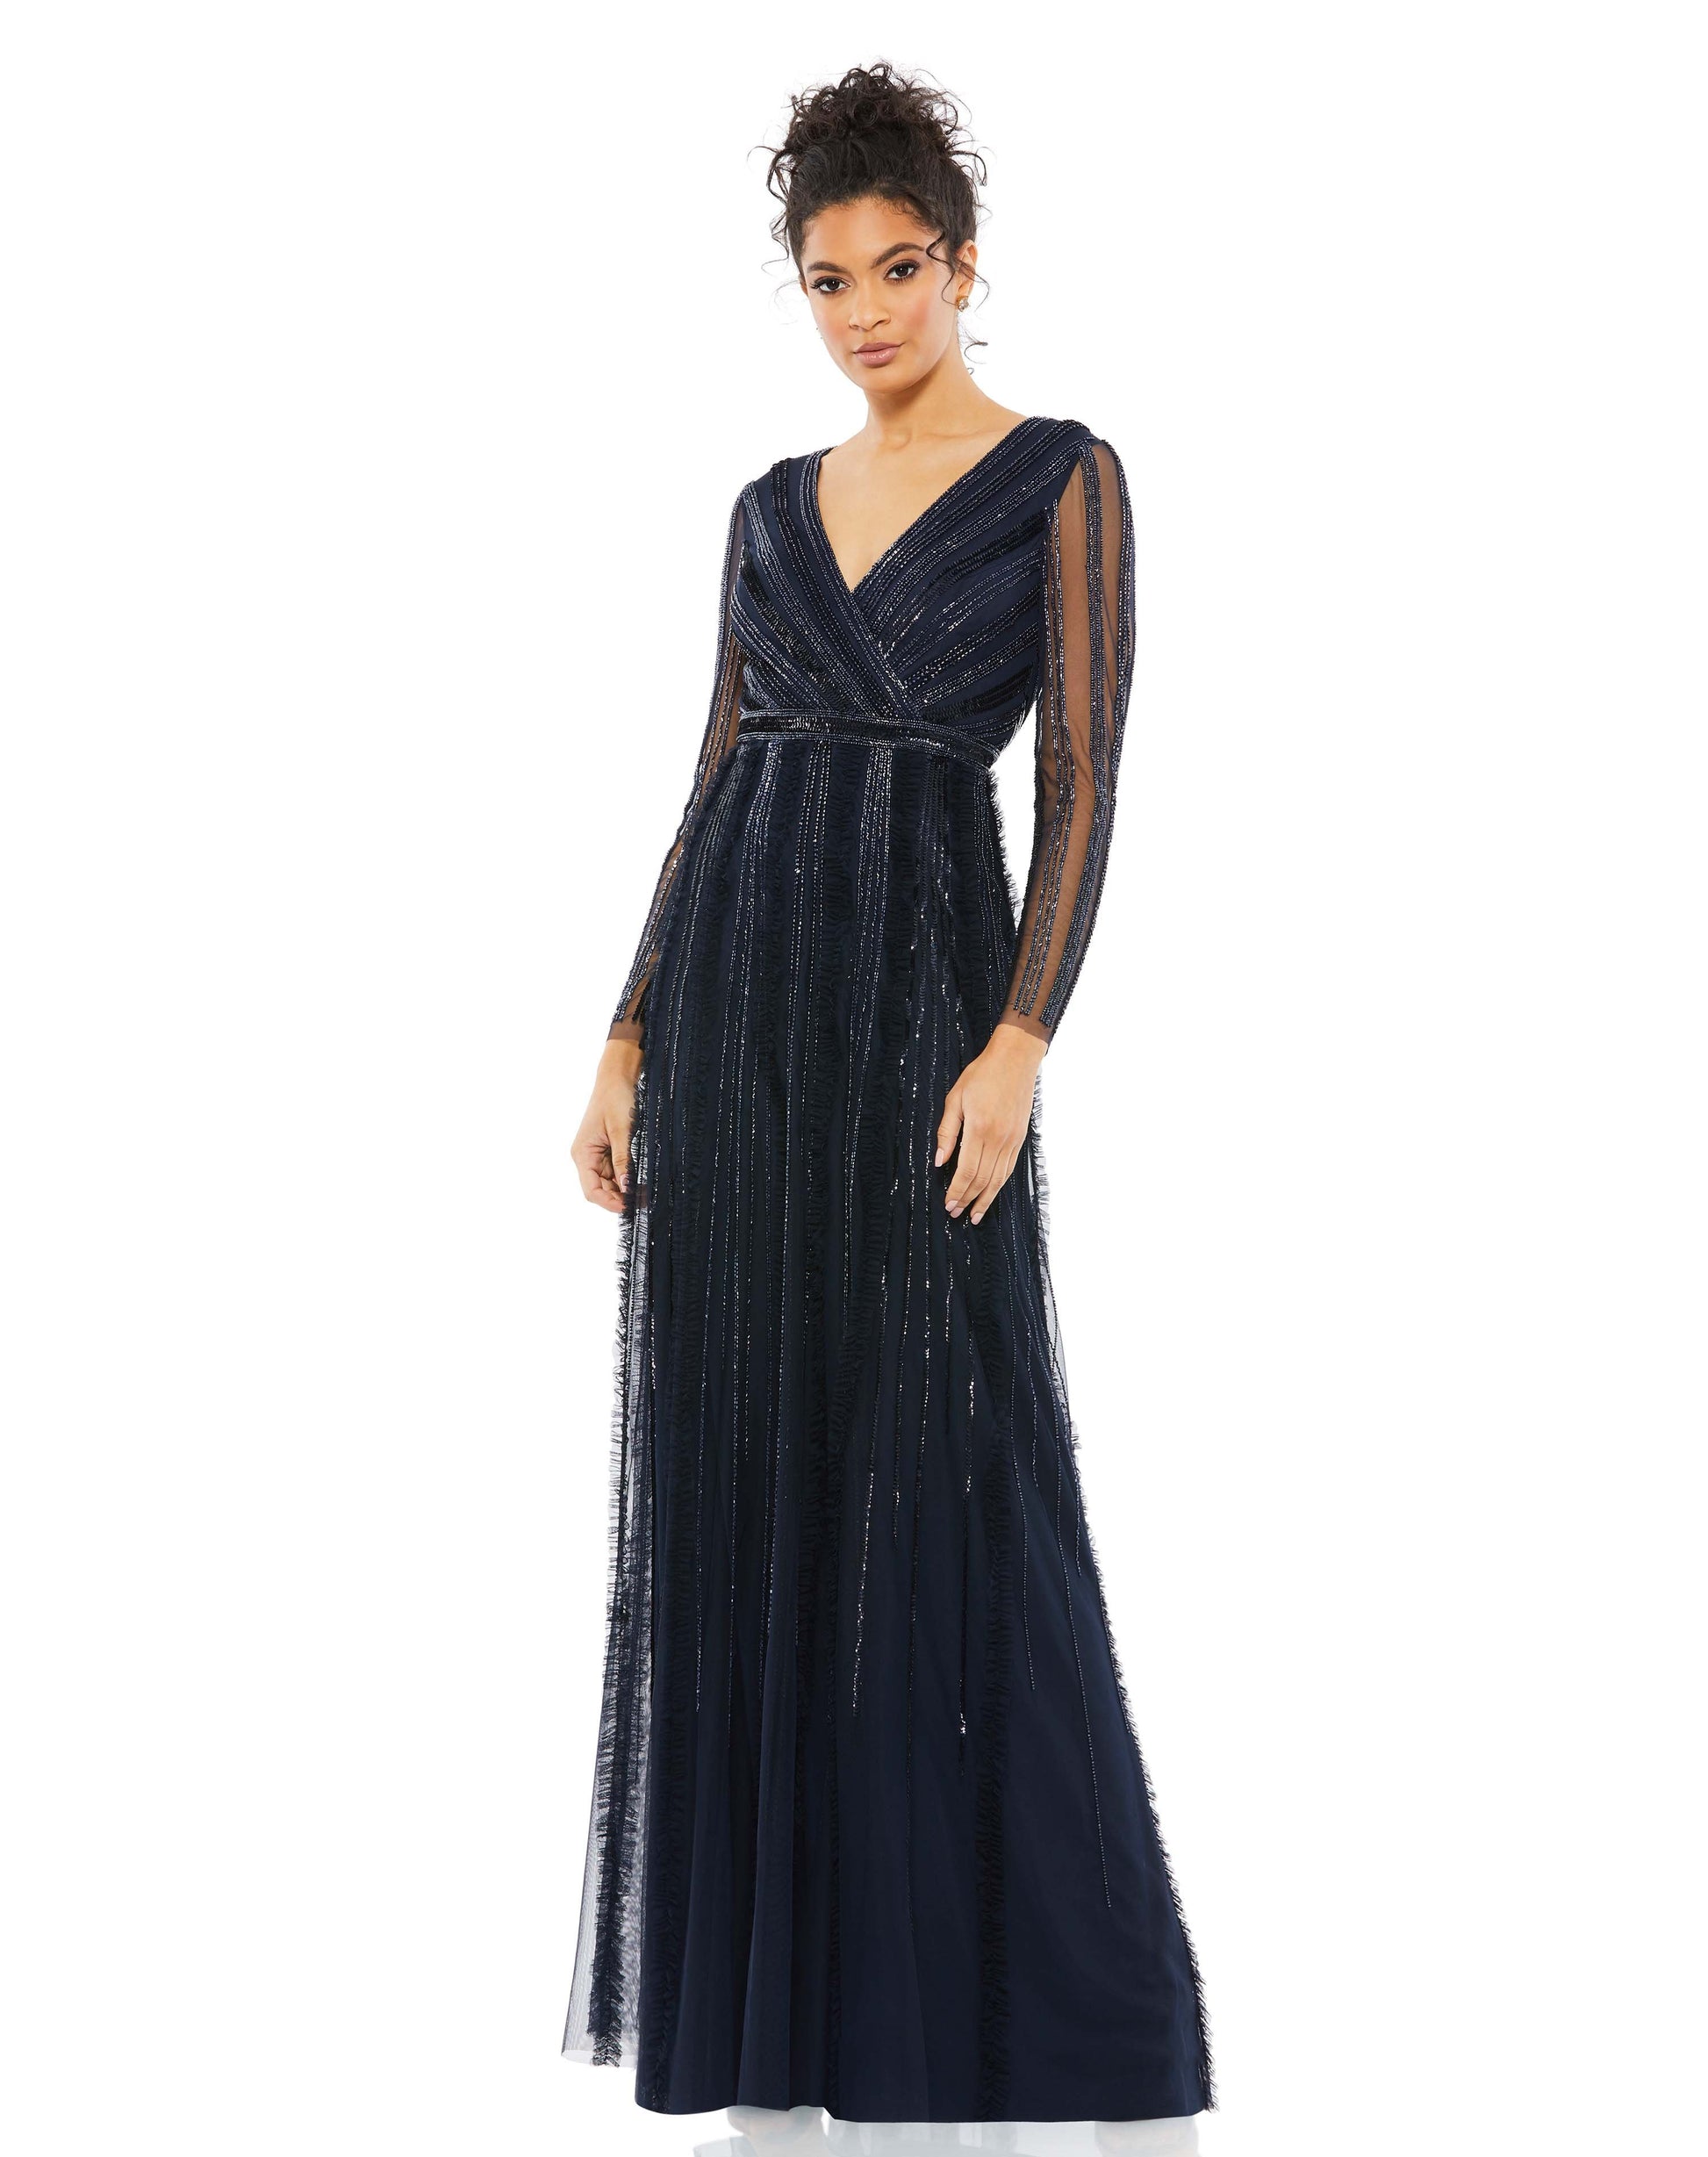 Elegant evening gown with a faux-wrap v-neckline, long illusion sleeves, and a floor-length skirt. The bodice and sleeves feature rows of sequins and beads throughout the mesh, and the skirt is embellished with elongating rows of beads, sequins, and subtl